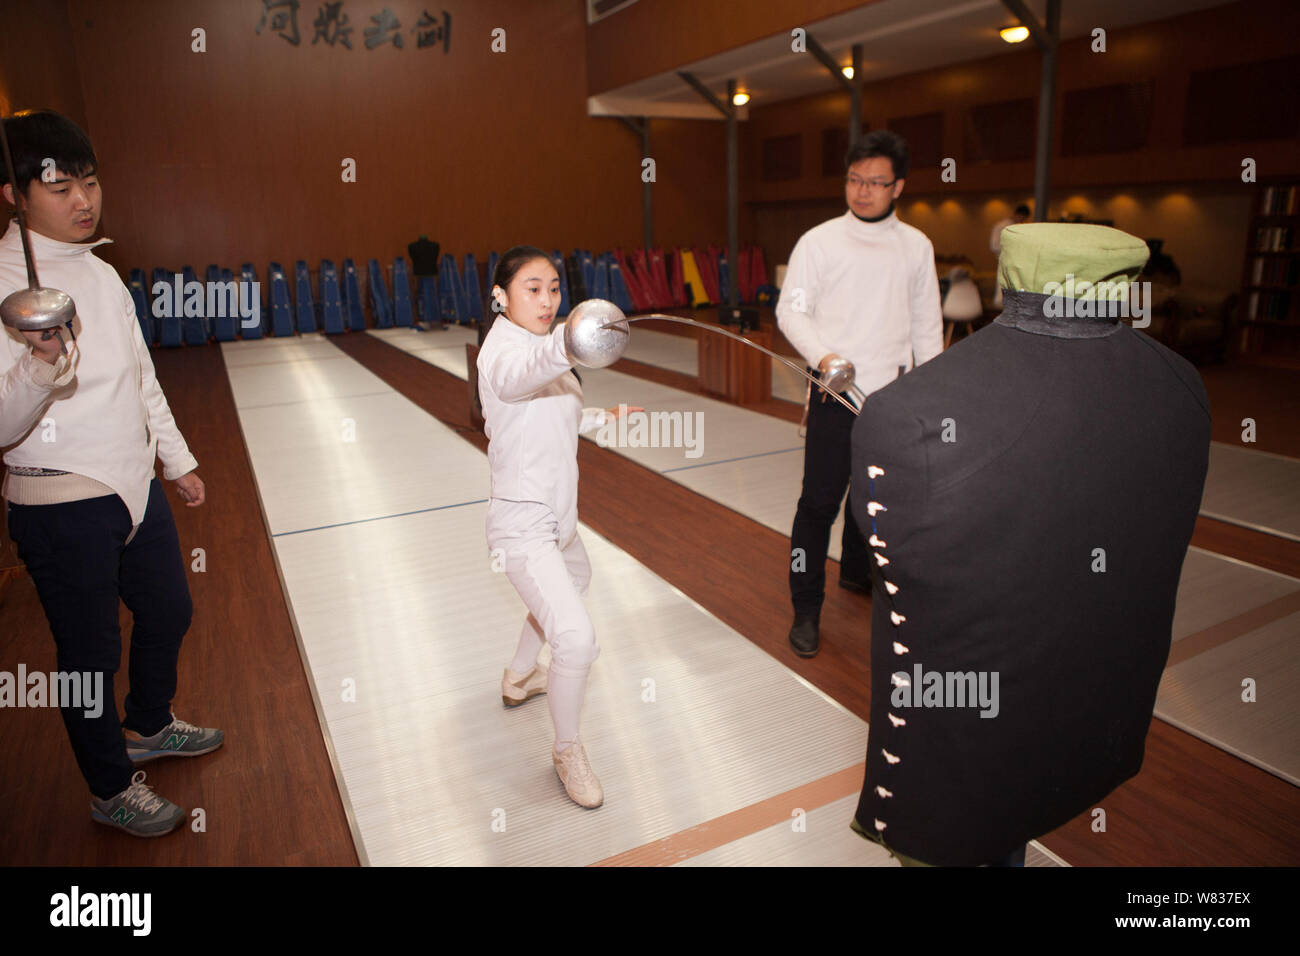 Chinese fencing trainer Mou Jiahui, center, instructs fencing skills to learners at her training center in Jilin city, northeast China's Jilin provinc Stock Photo